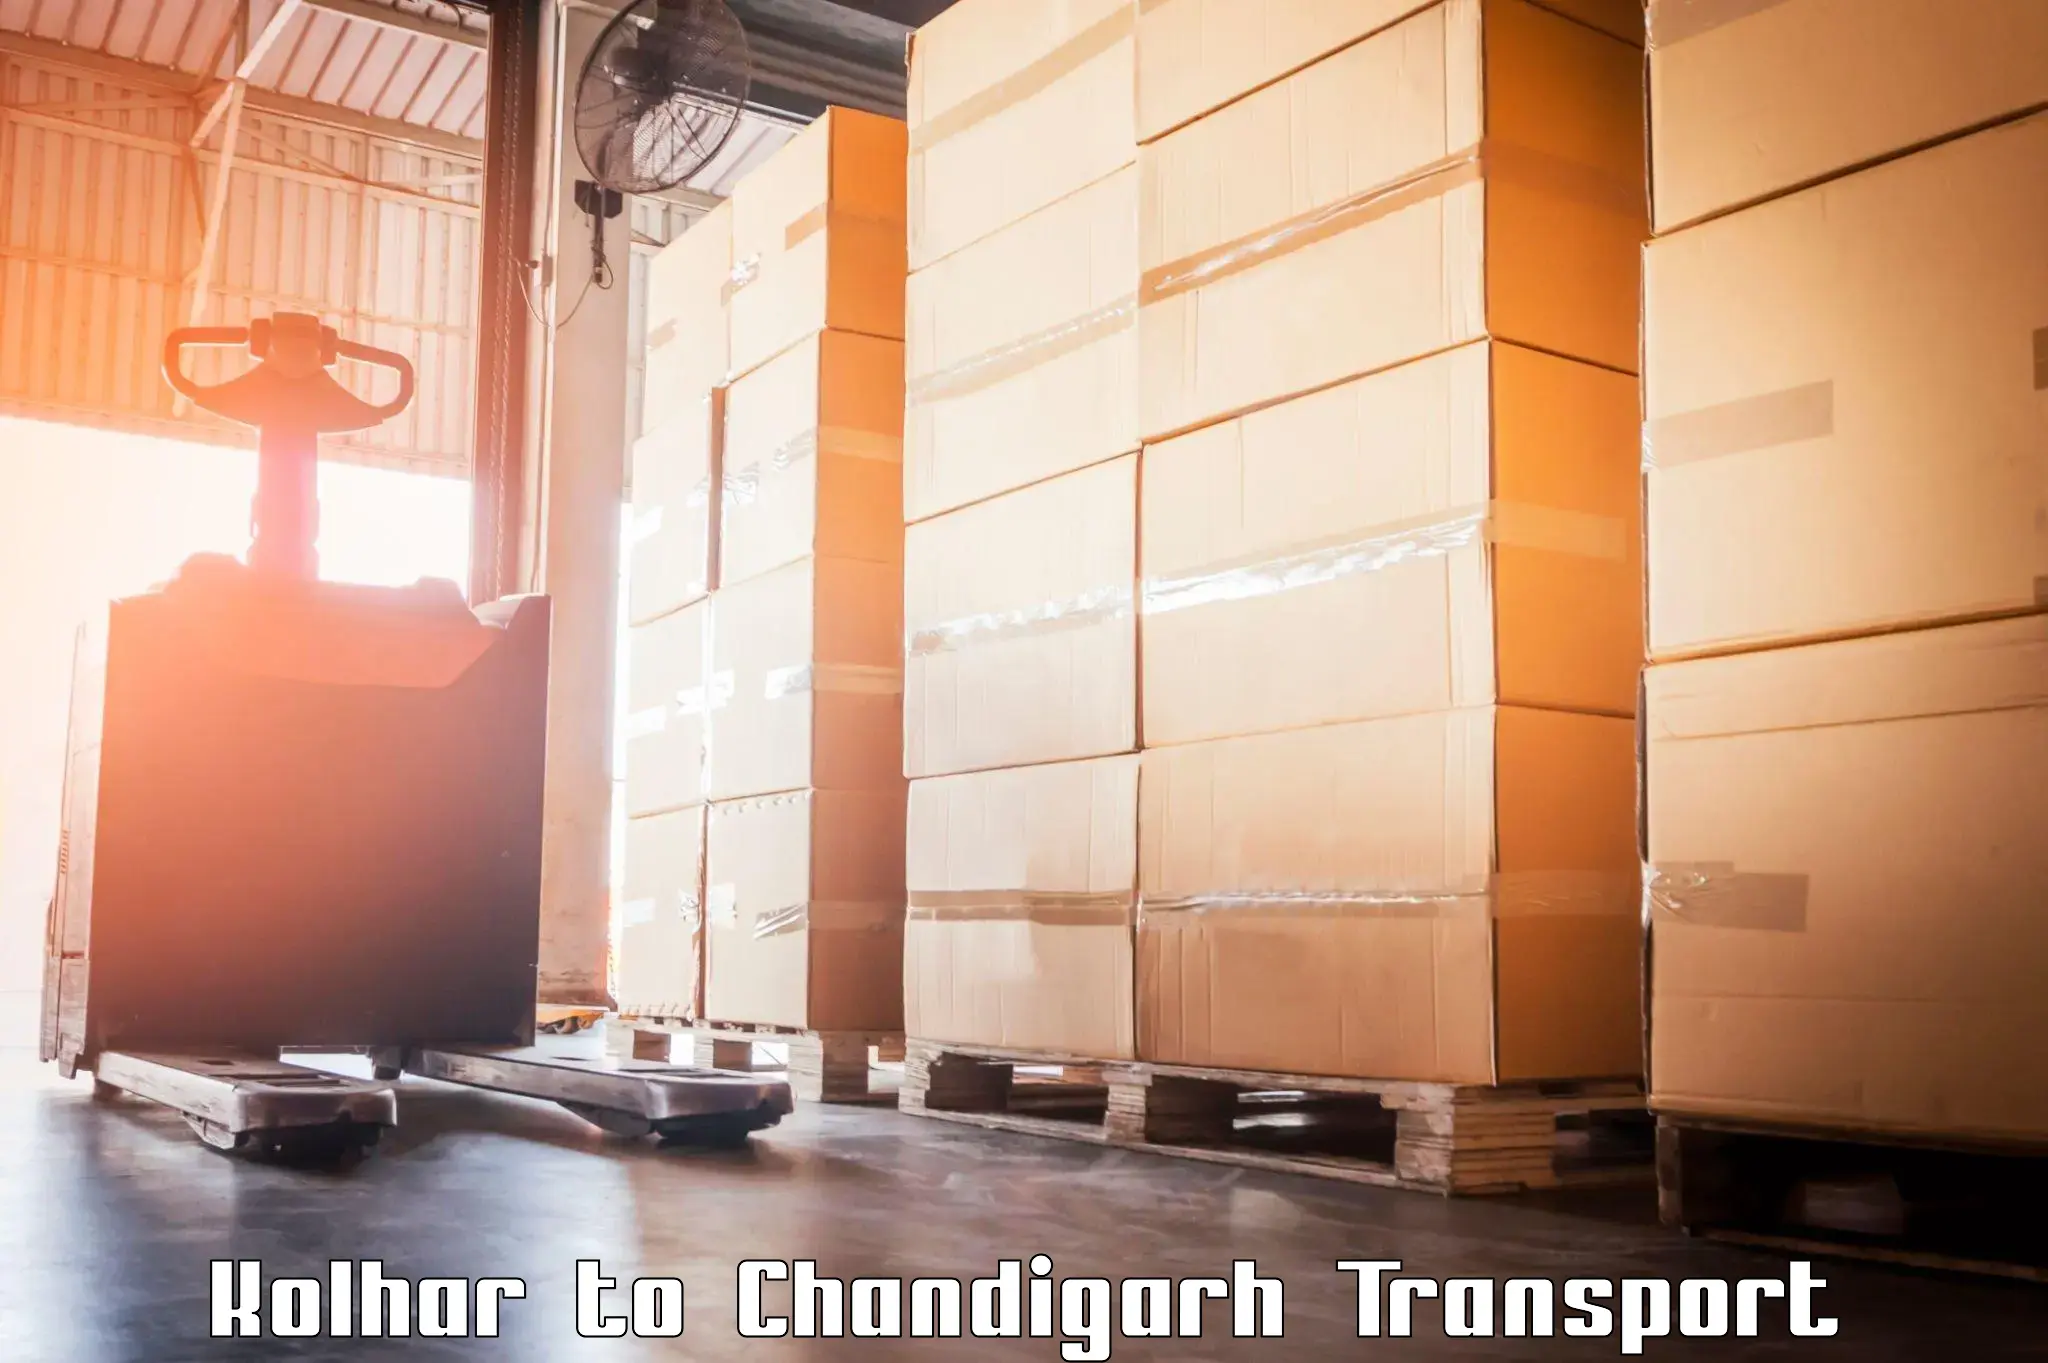 Cycle transportation service in Kolhar to Chandigarh